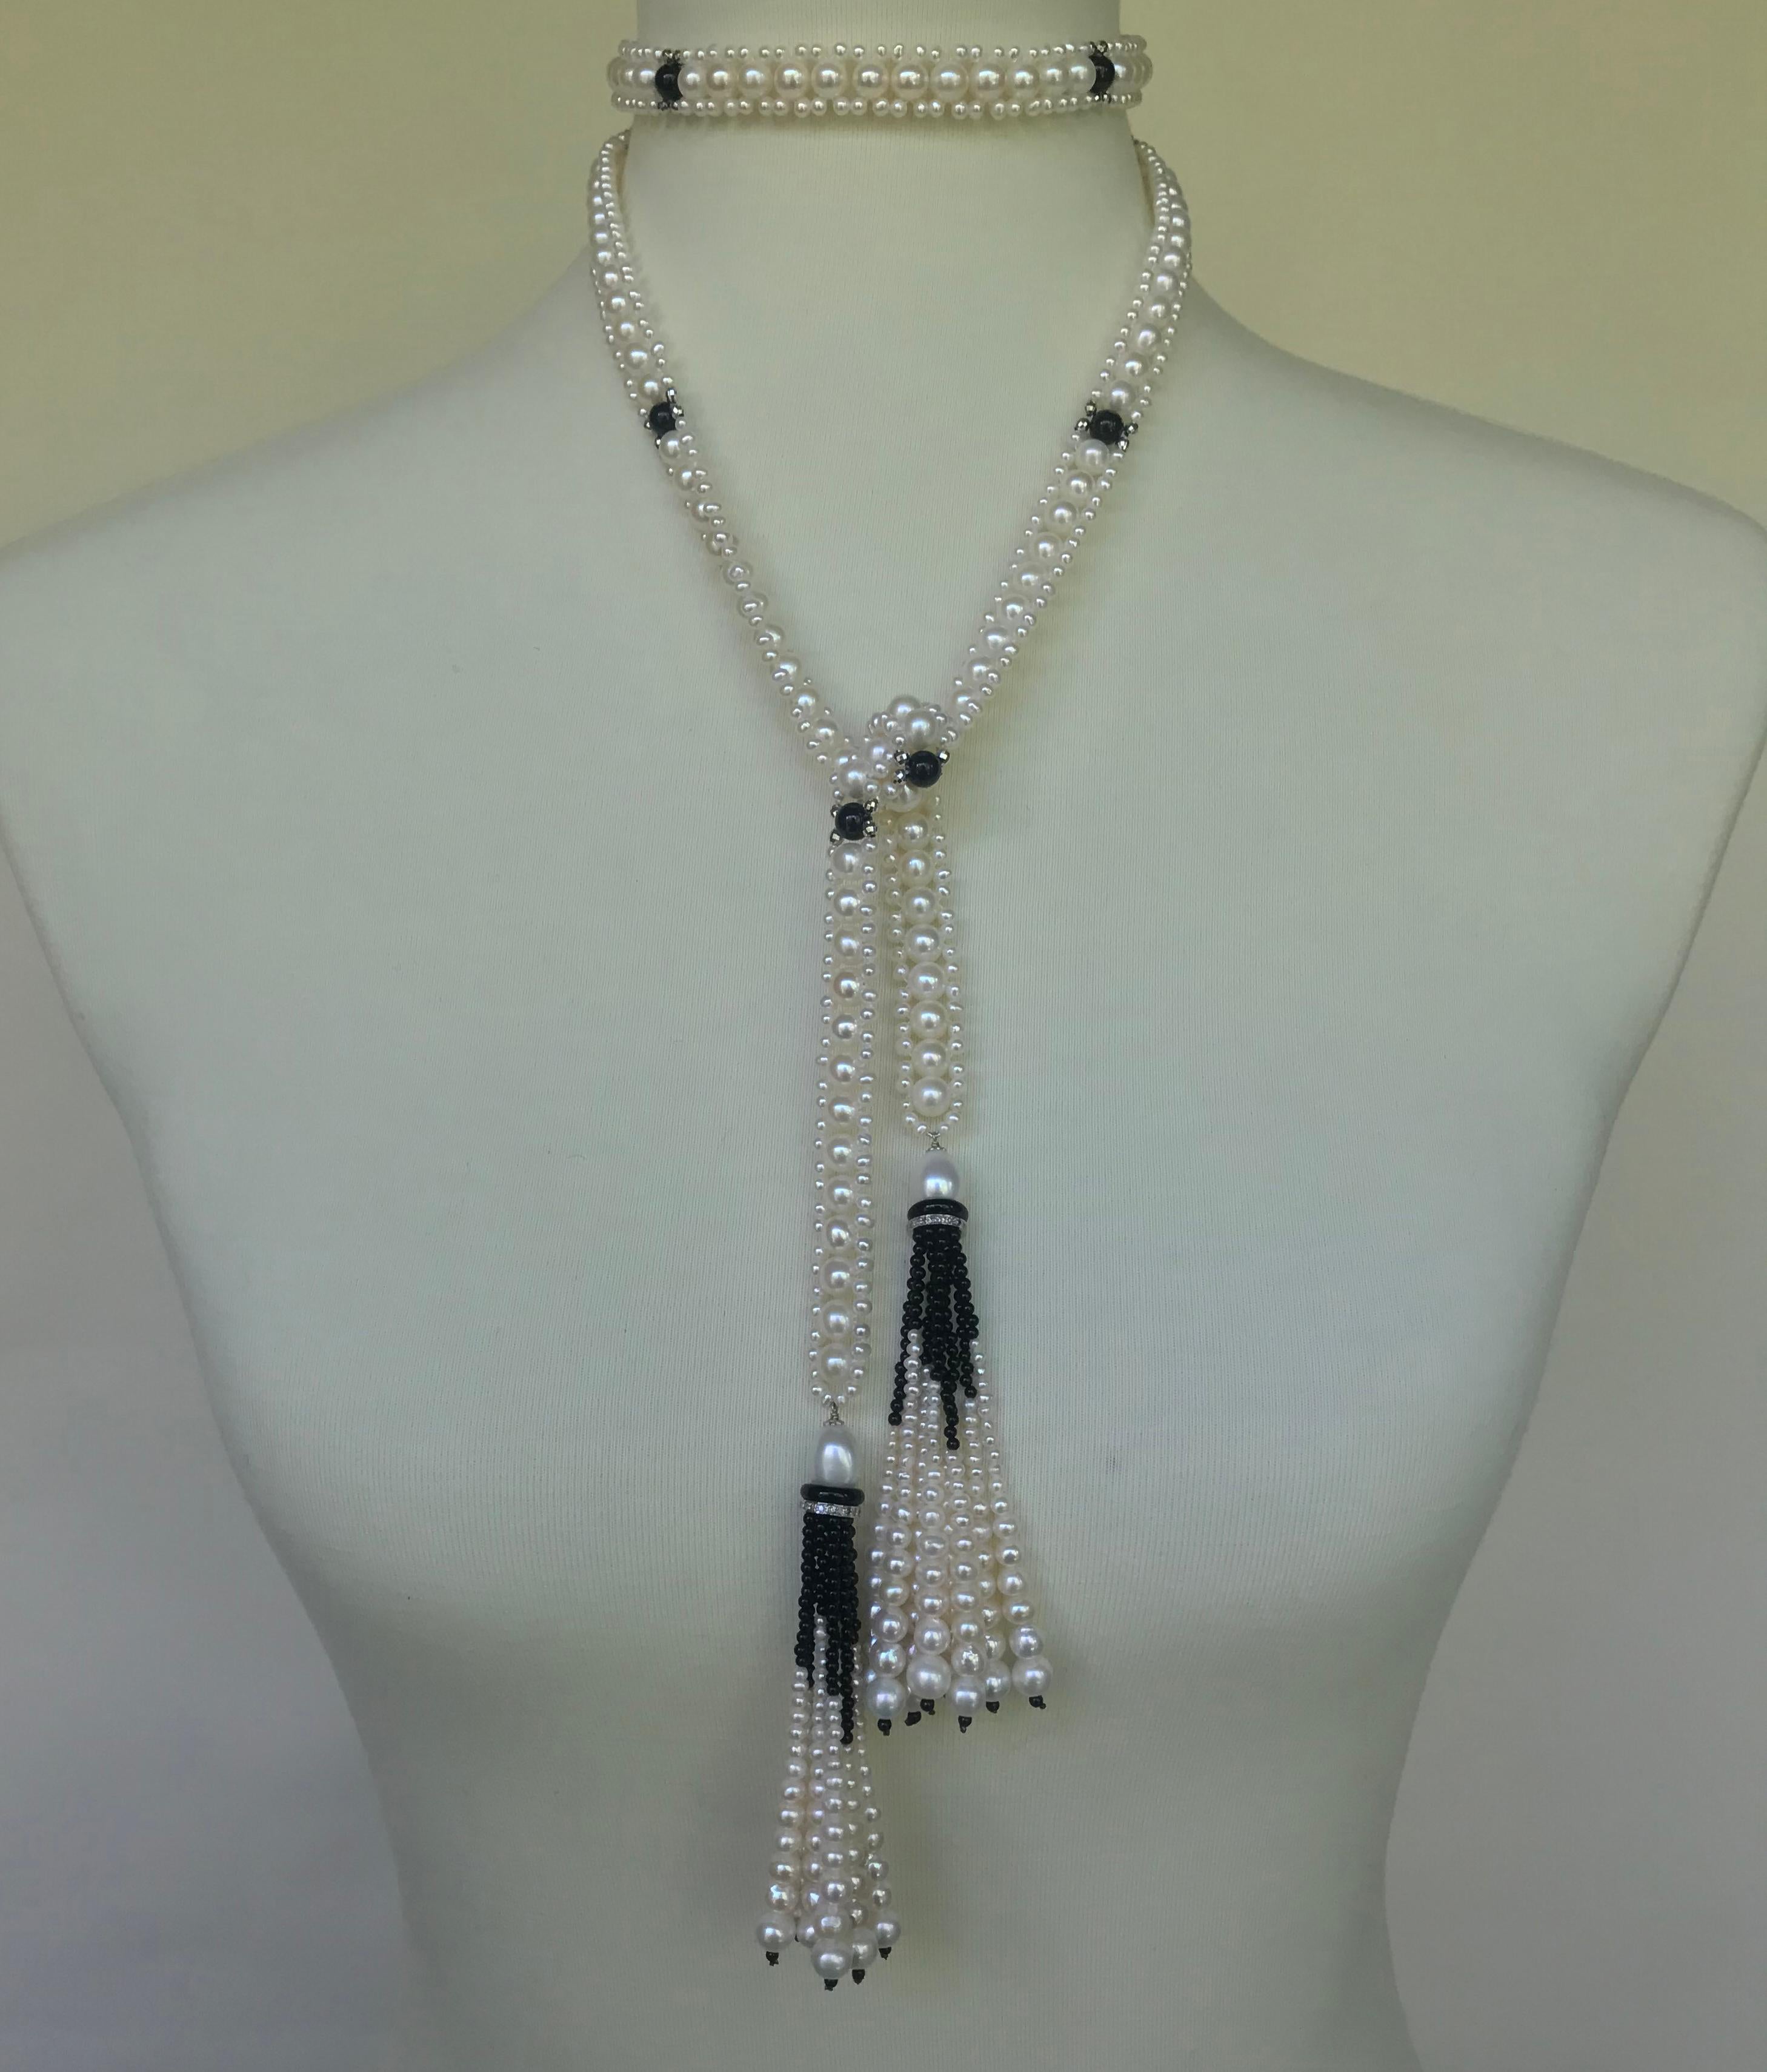 Women's Marina J Woven Pearl Sautoir with Tassels and 14 K White Gold and Onyx beads